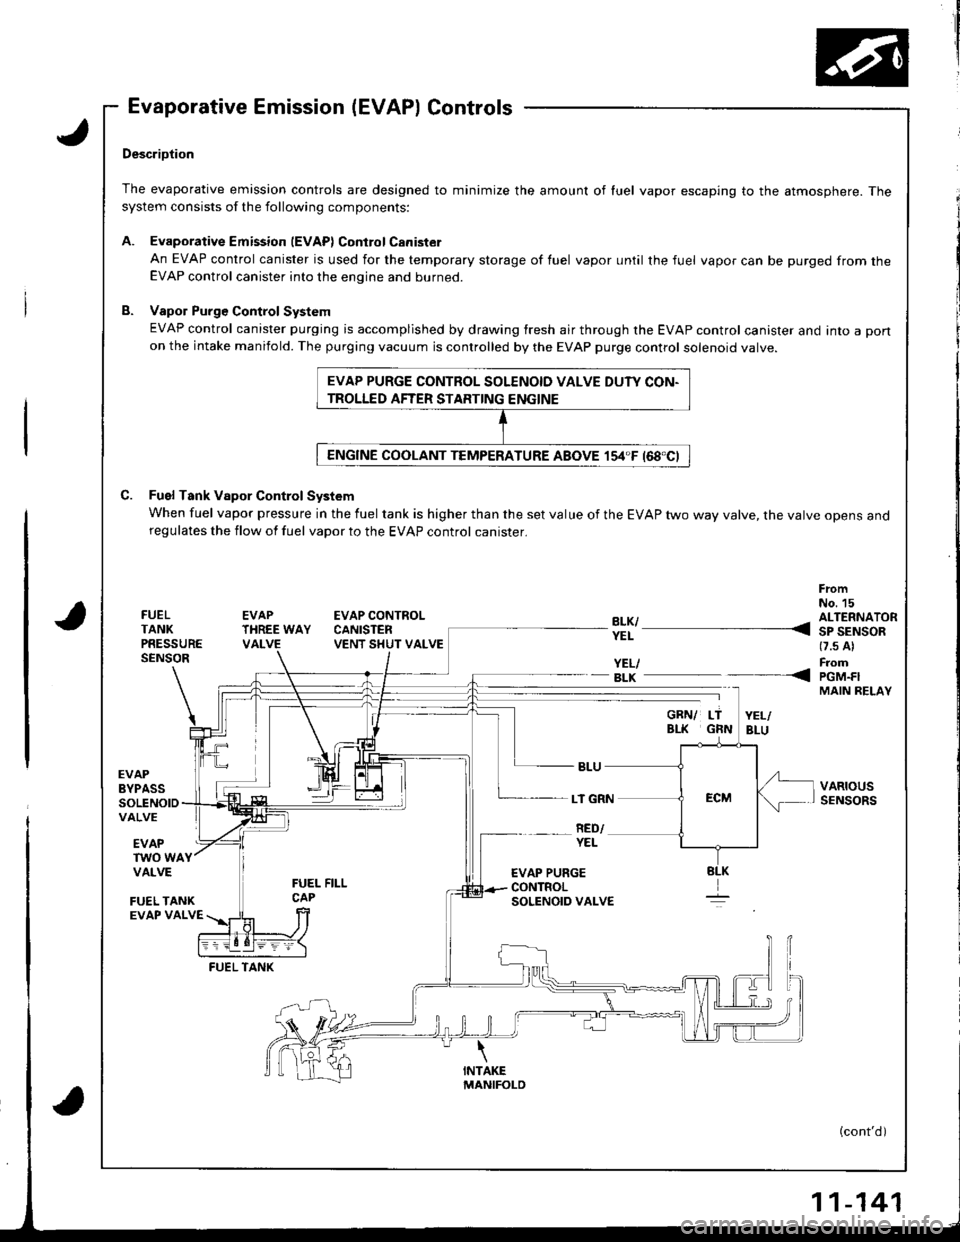 HONDA INTEGRA 1998 4.G Workshop Manual Evaporative Emission (EVAP) Controls
,J
a
DescriDtion
The evaporative emission controls are designed to minimize the amount of luel vapor escaping to the atmosphere. Thesystem consists of the followin